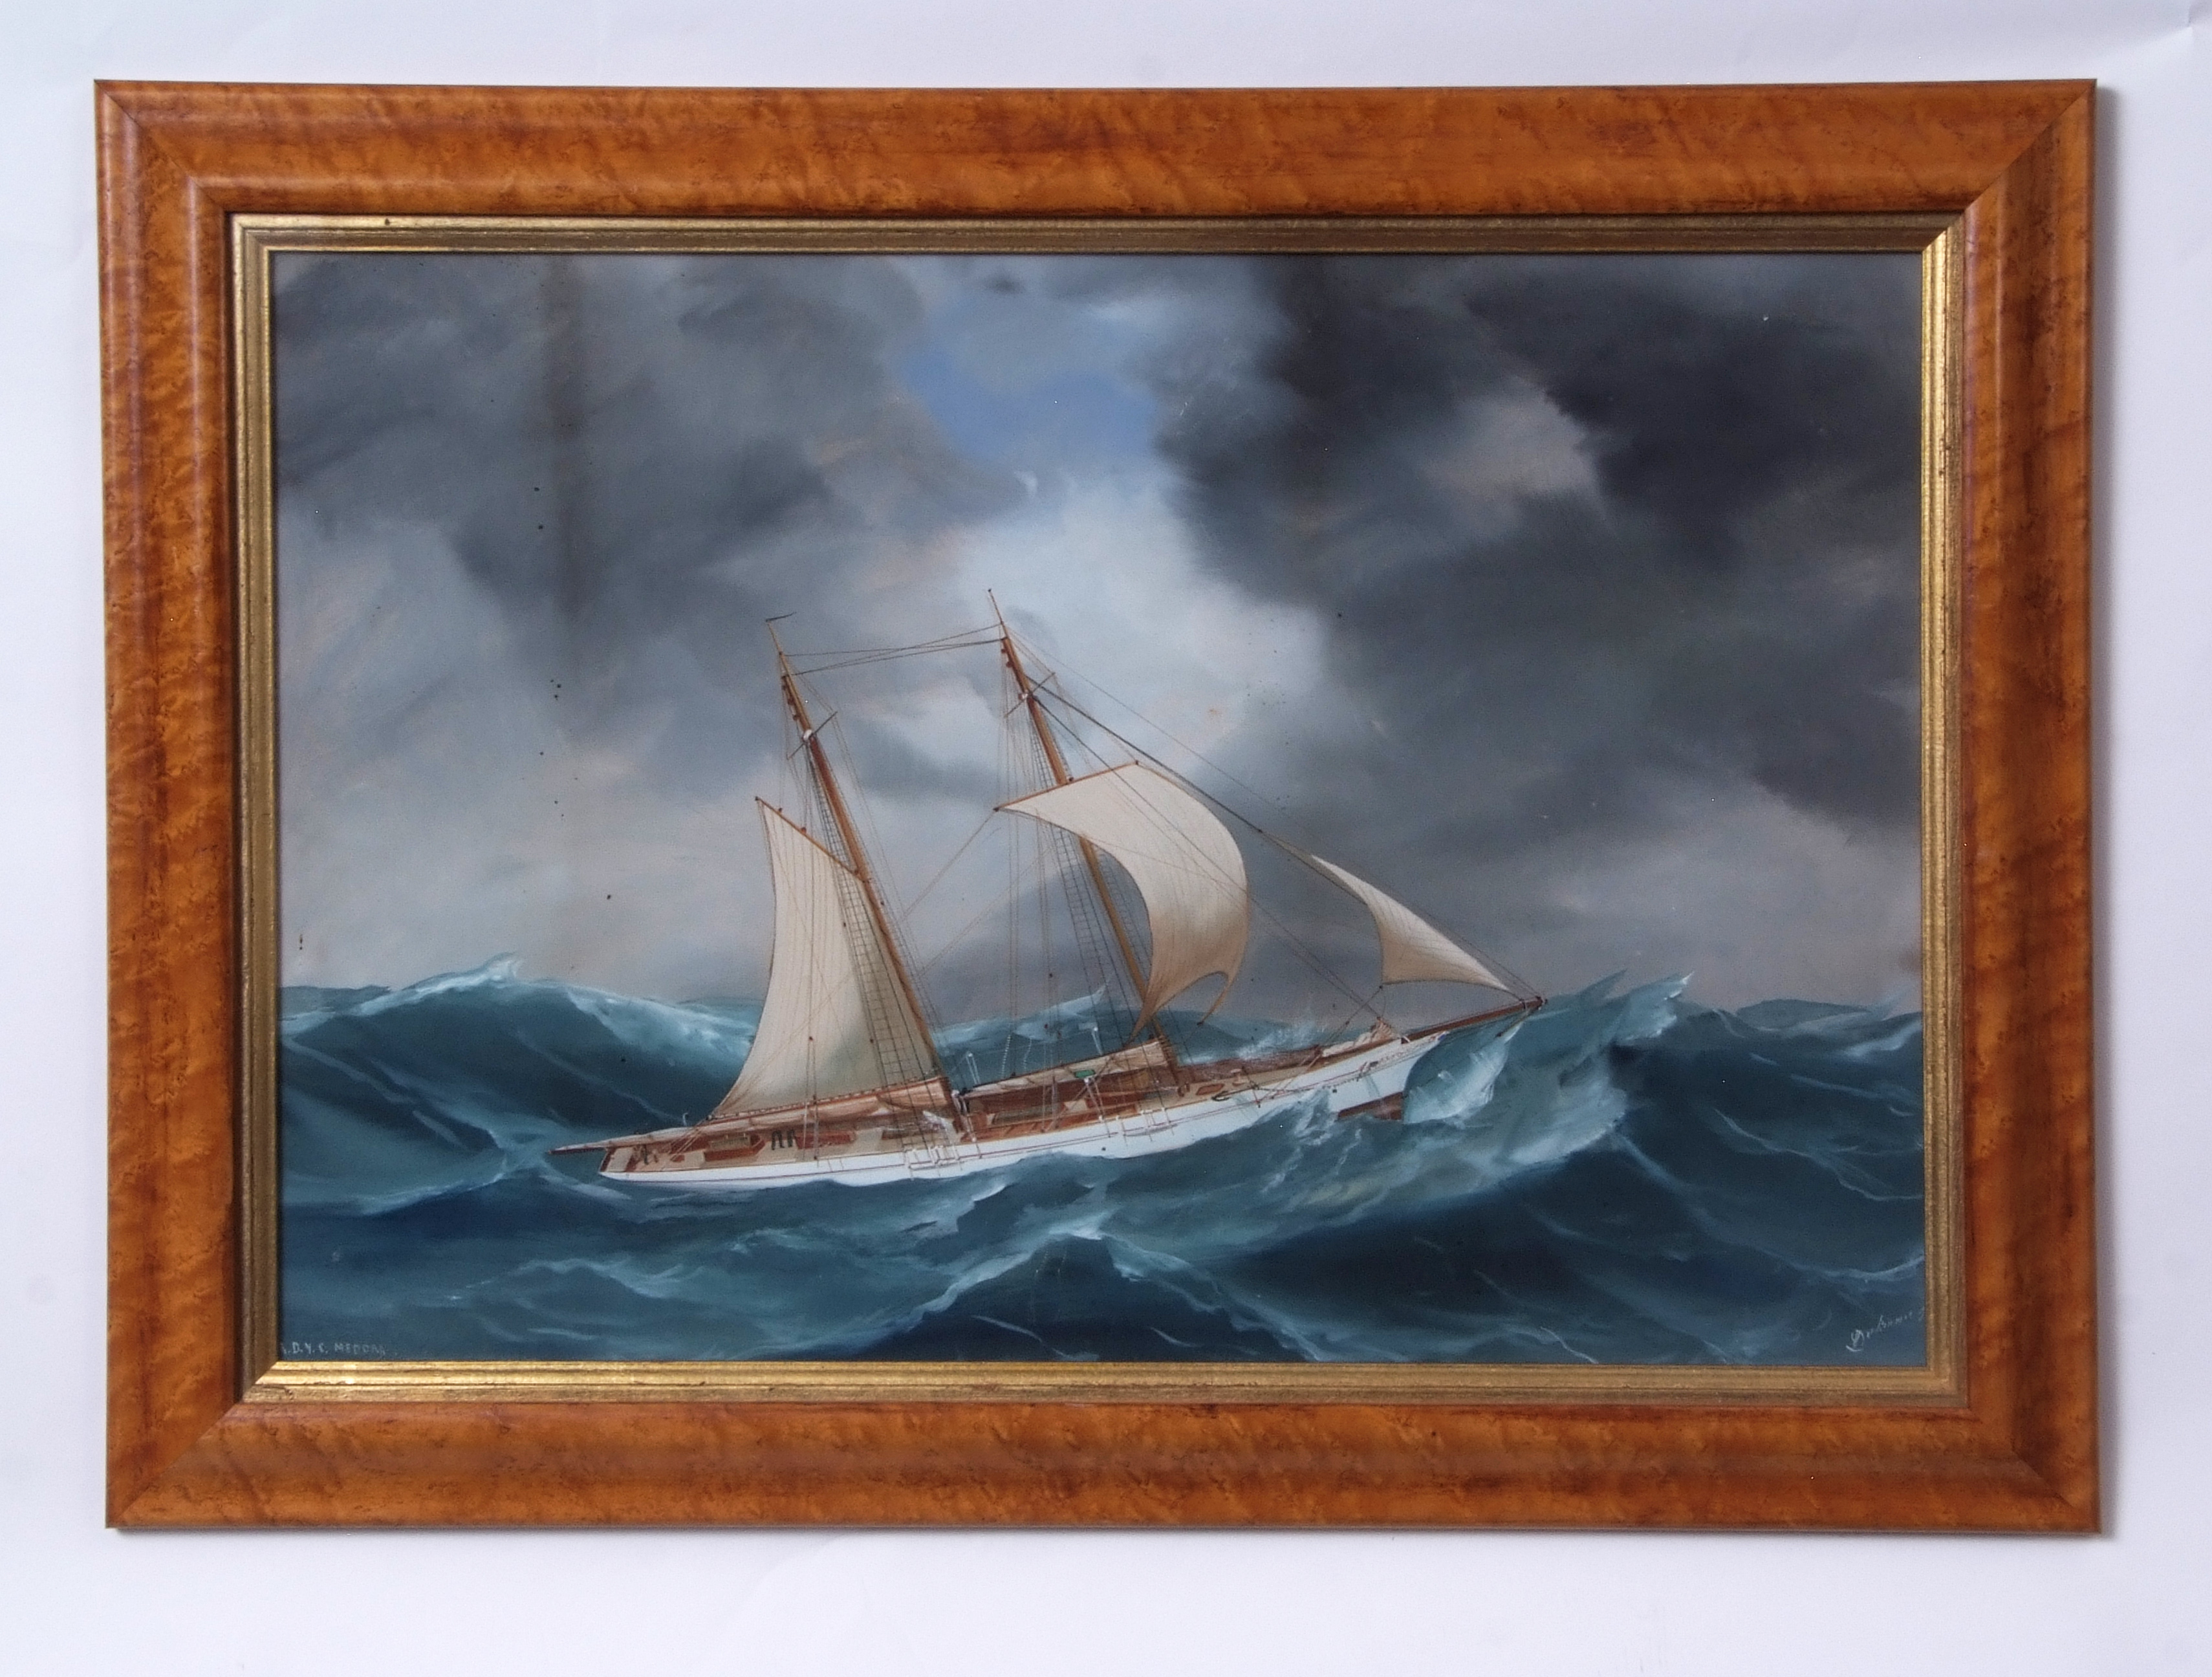 Antonio de Simone (1851-1907) "Adys Medora", gouache, signed lower right and inscribed with title - Image 2 of 2